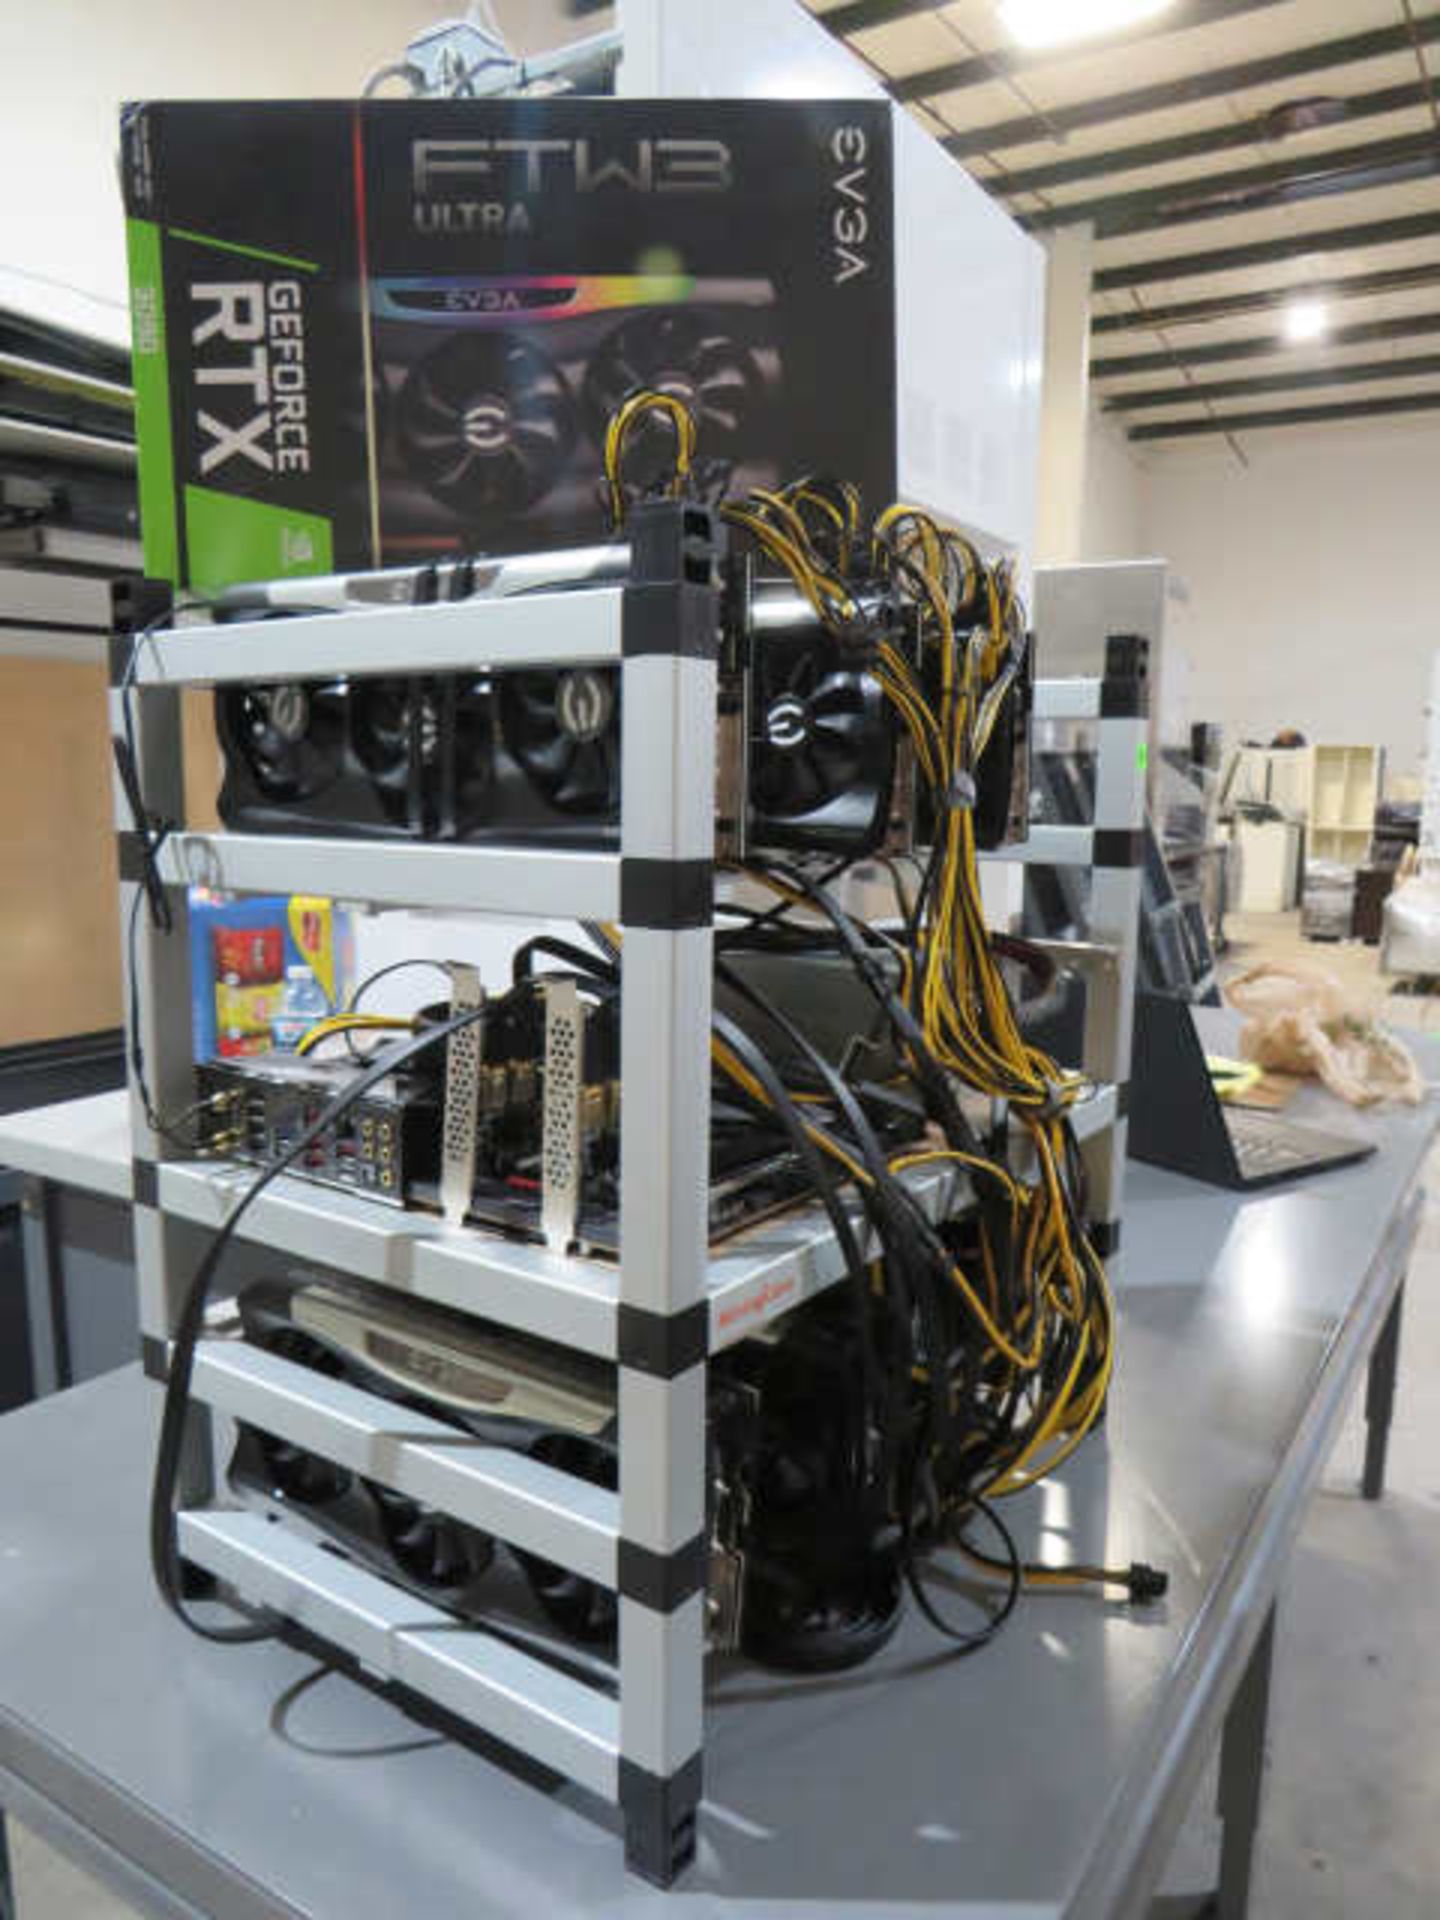 crypto mining rig with 6 Geeforce rtx 3090 graphics cards comes